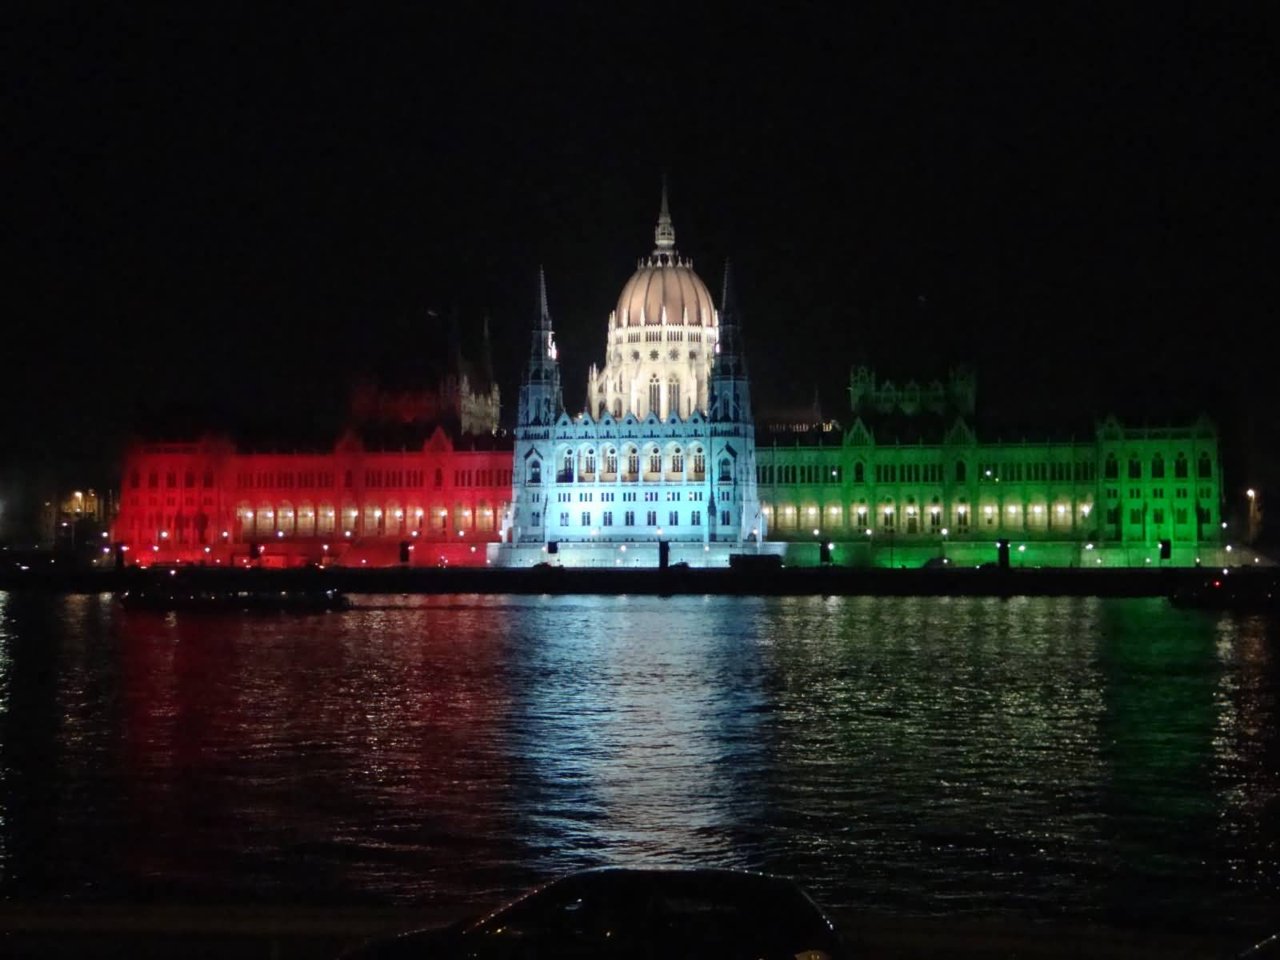 Flag-Of-Hungary-Lights-On-The-Hungarian-Parliament-Building-At-Night.jpg